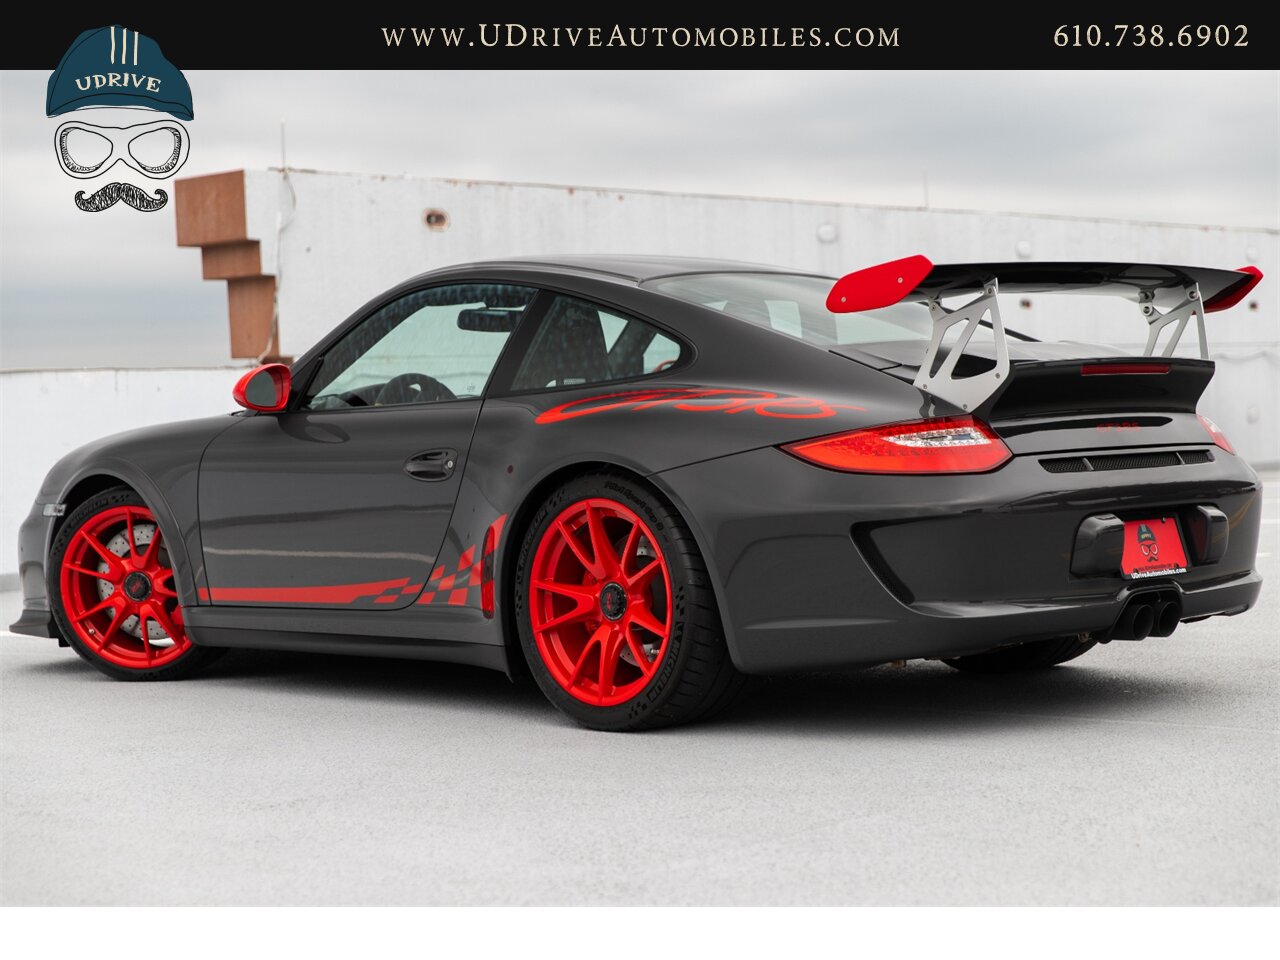 2010 Porsche 911 GT3 RS 1k Miles Dev Red Stitching Throughout  Front Axle Lift Sport Chrono 997.2 - Photo 6 - West Chester, PA 19382